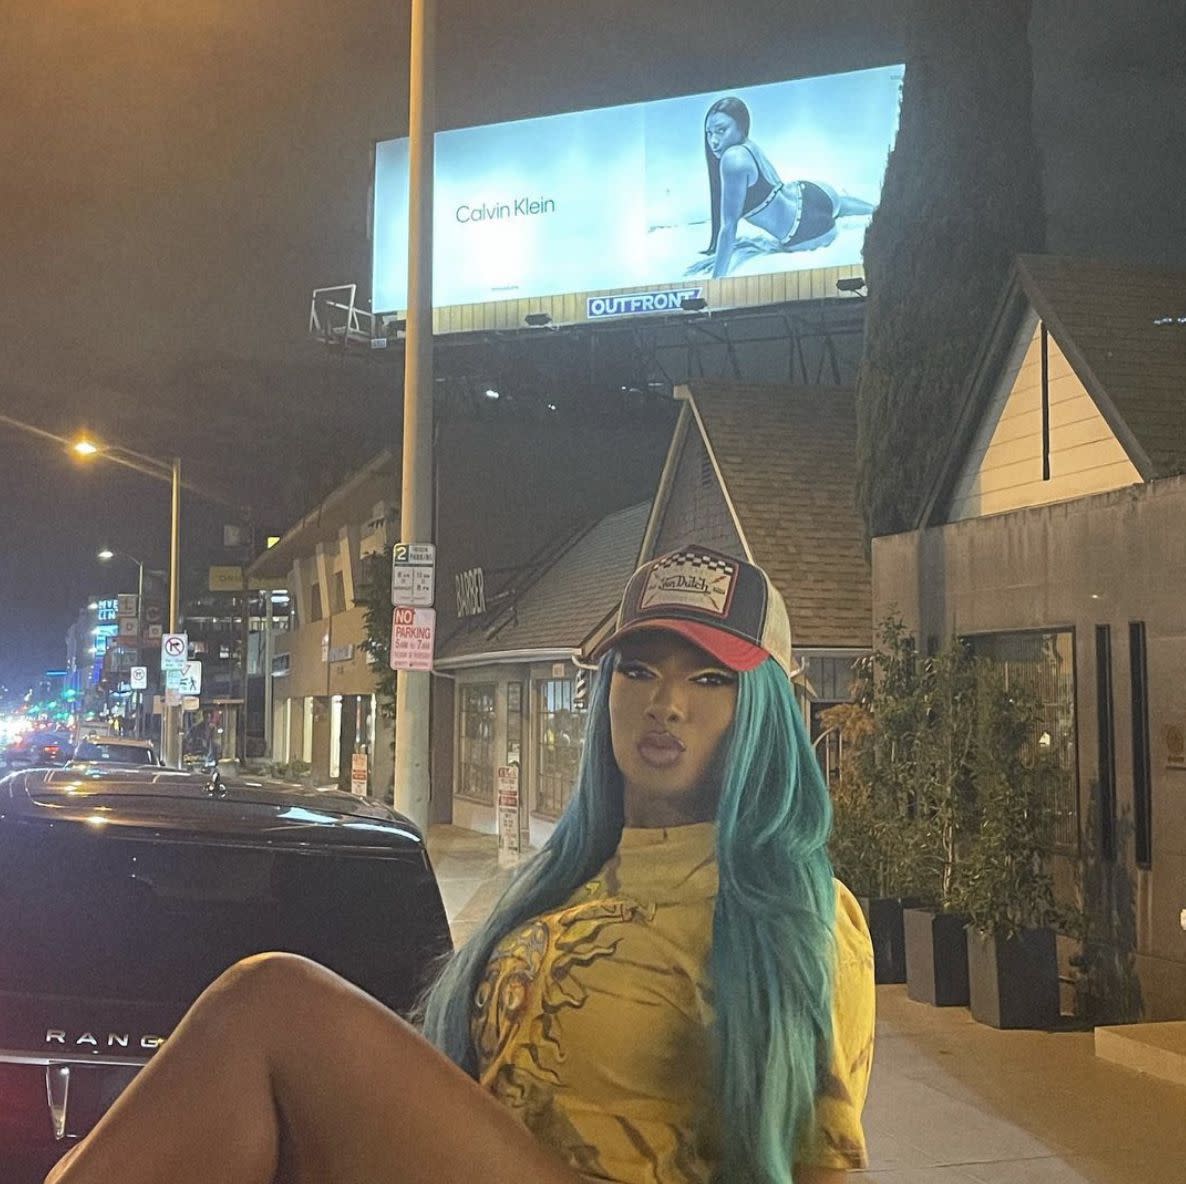 "Body" rapper Megan Thee Stallion strikes a pose in front of her Calvin Klein billboard on Wednesday, March 3, 2021. "I’ll be back , I’m bout to go crazy #mycalvins"